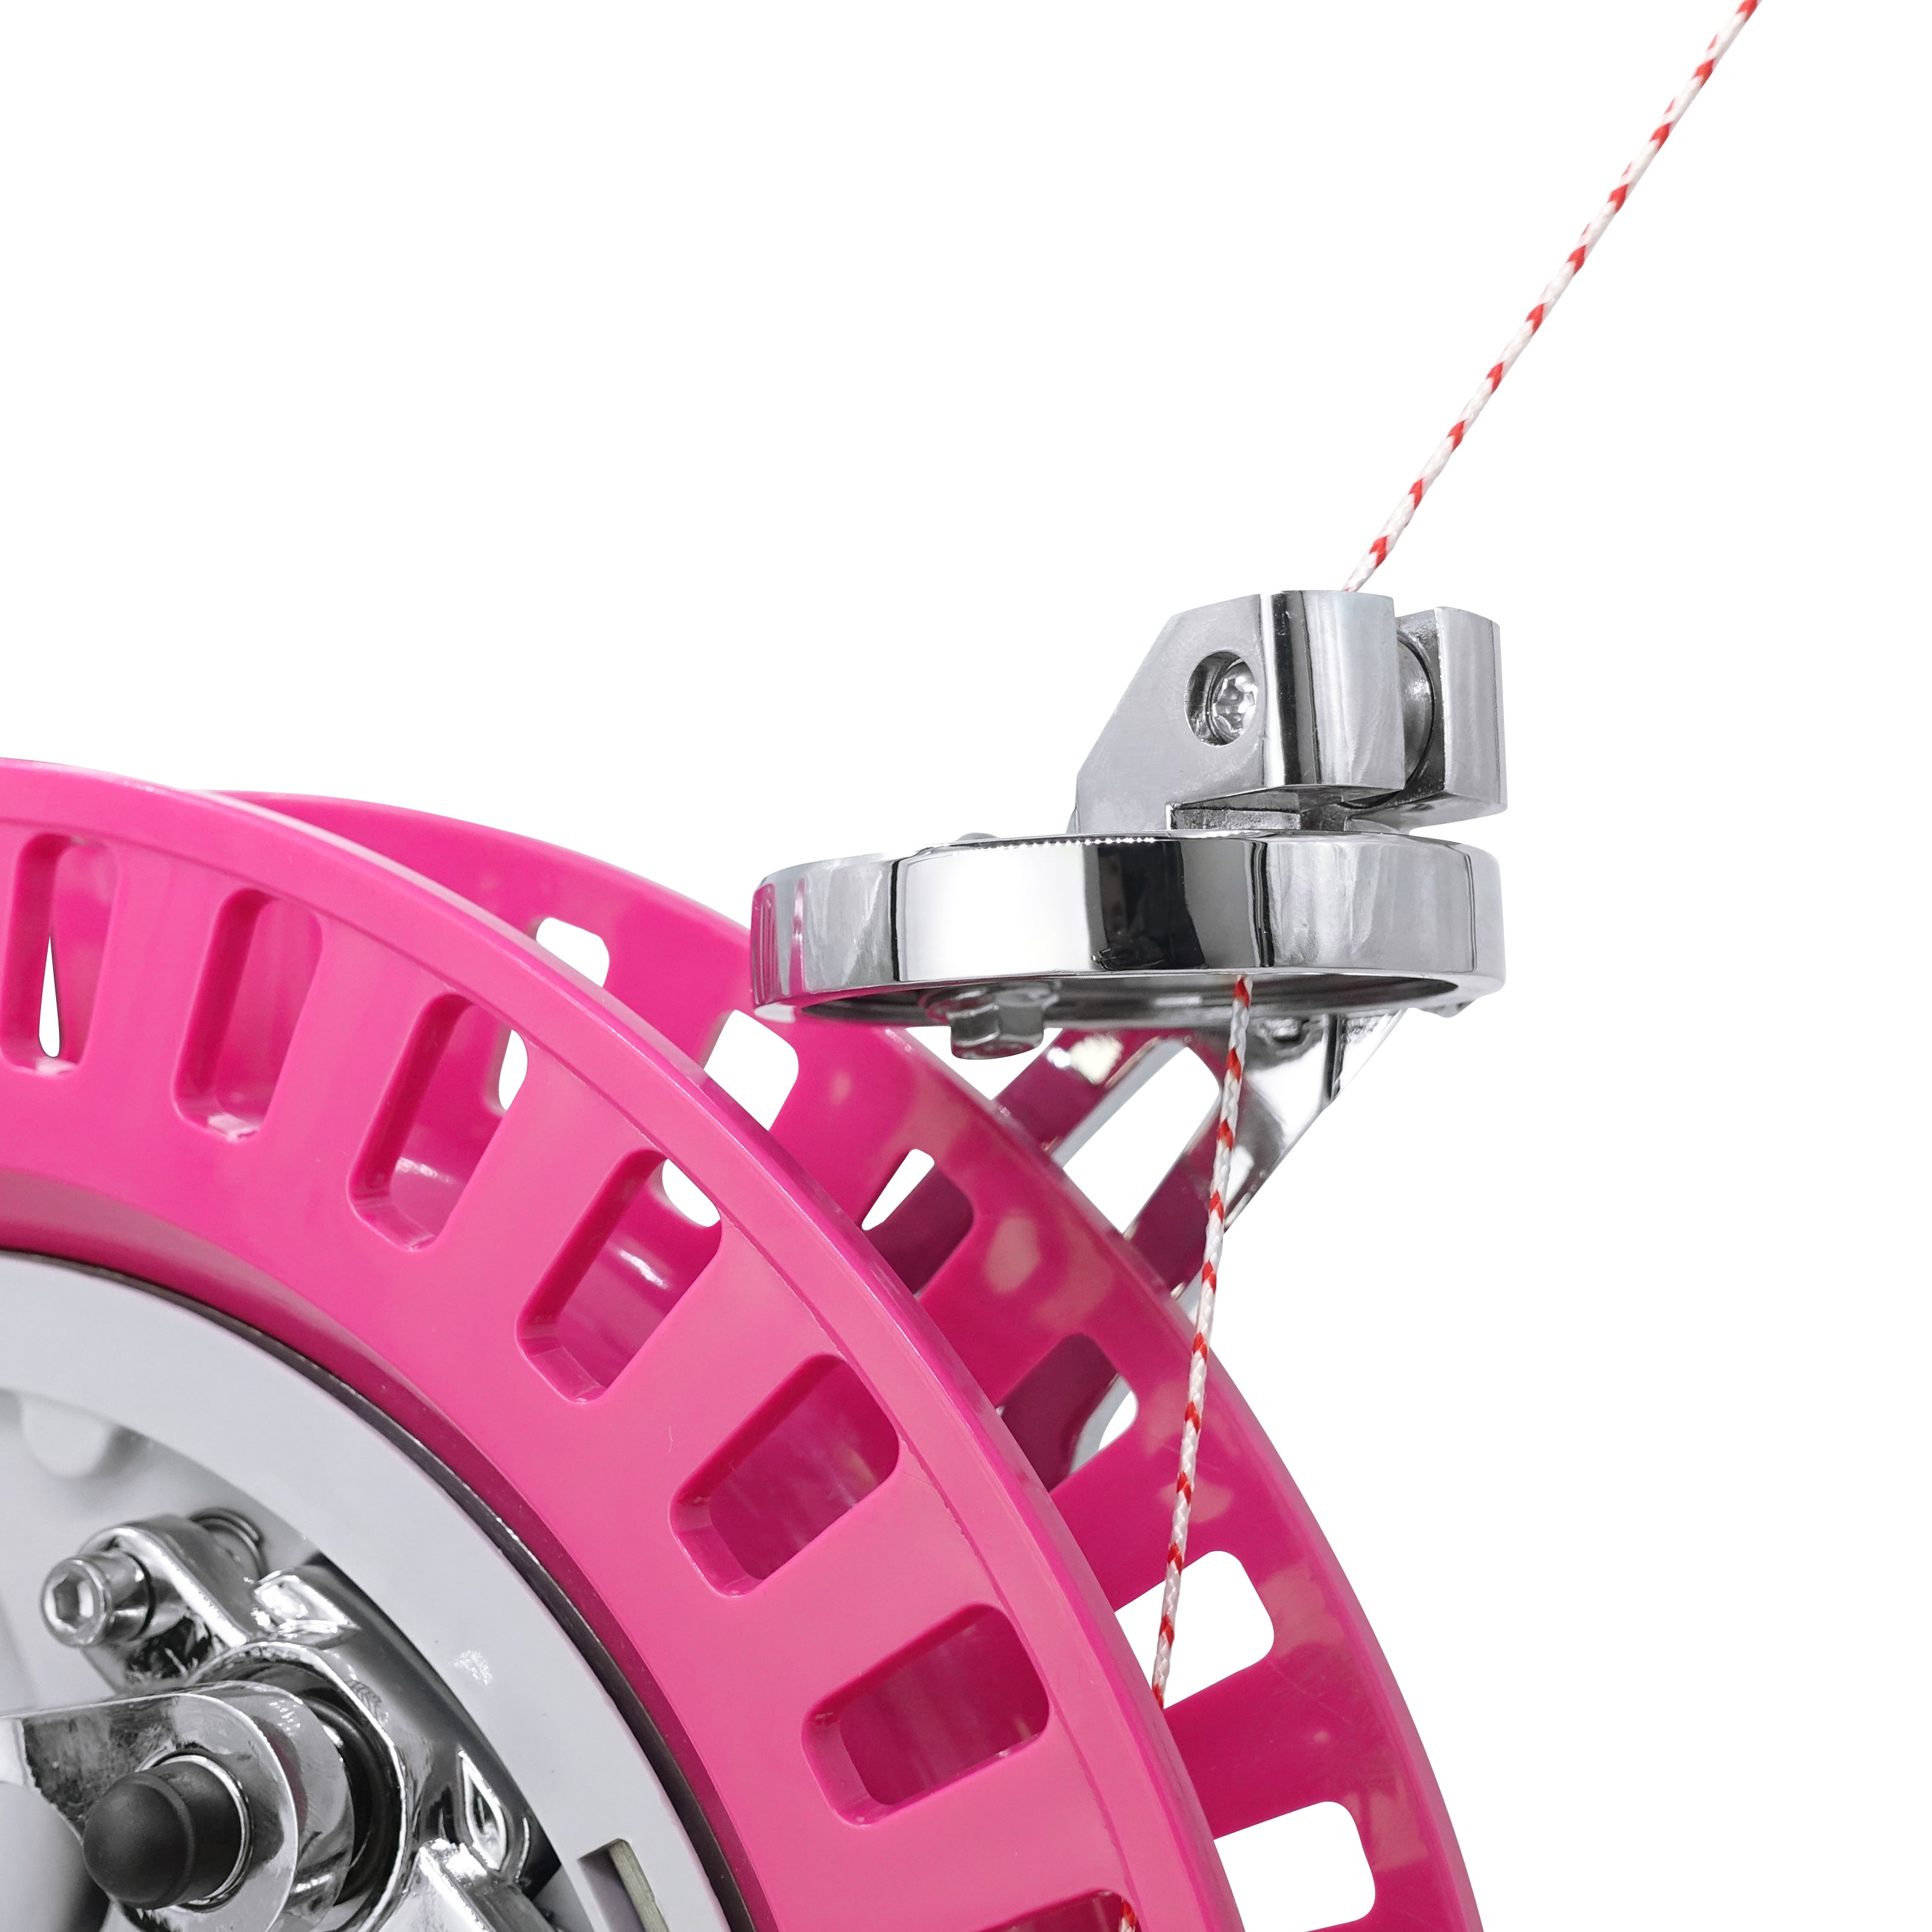 10.6 inch Large Kite Reel with Strap